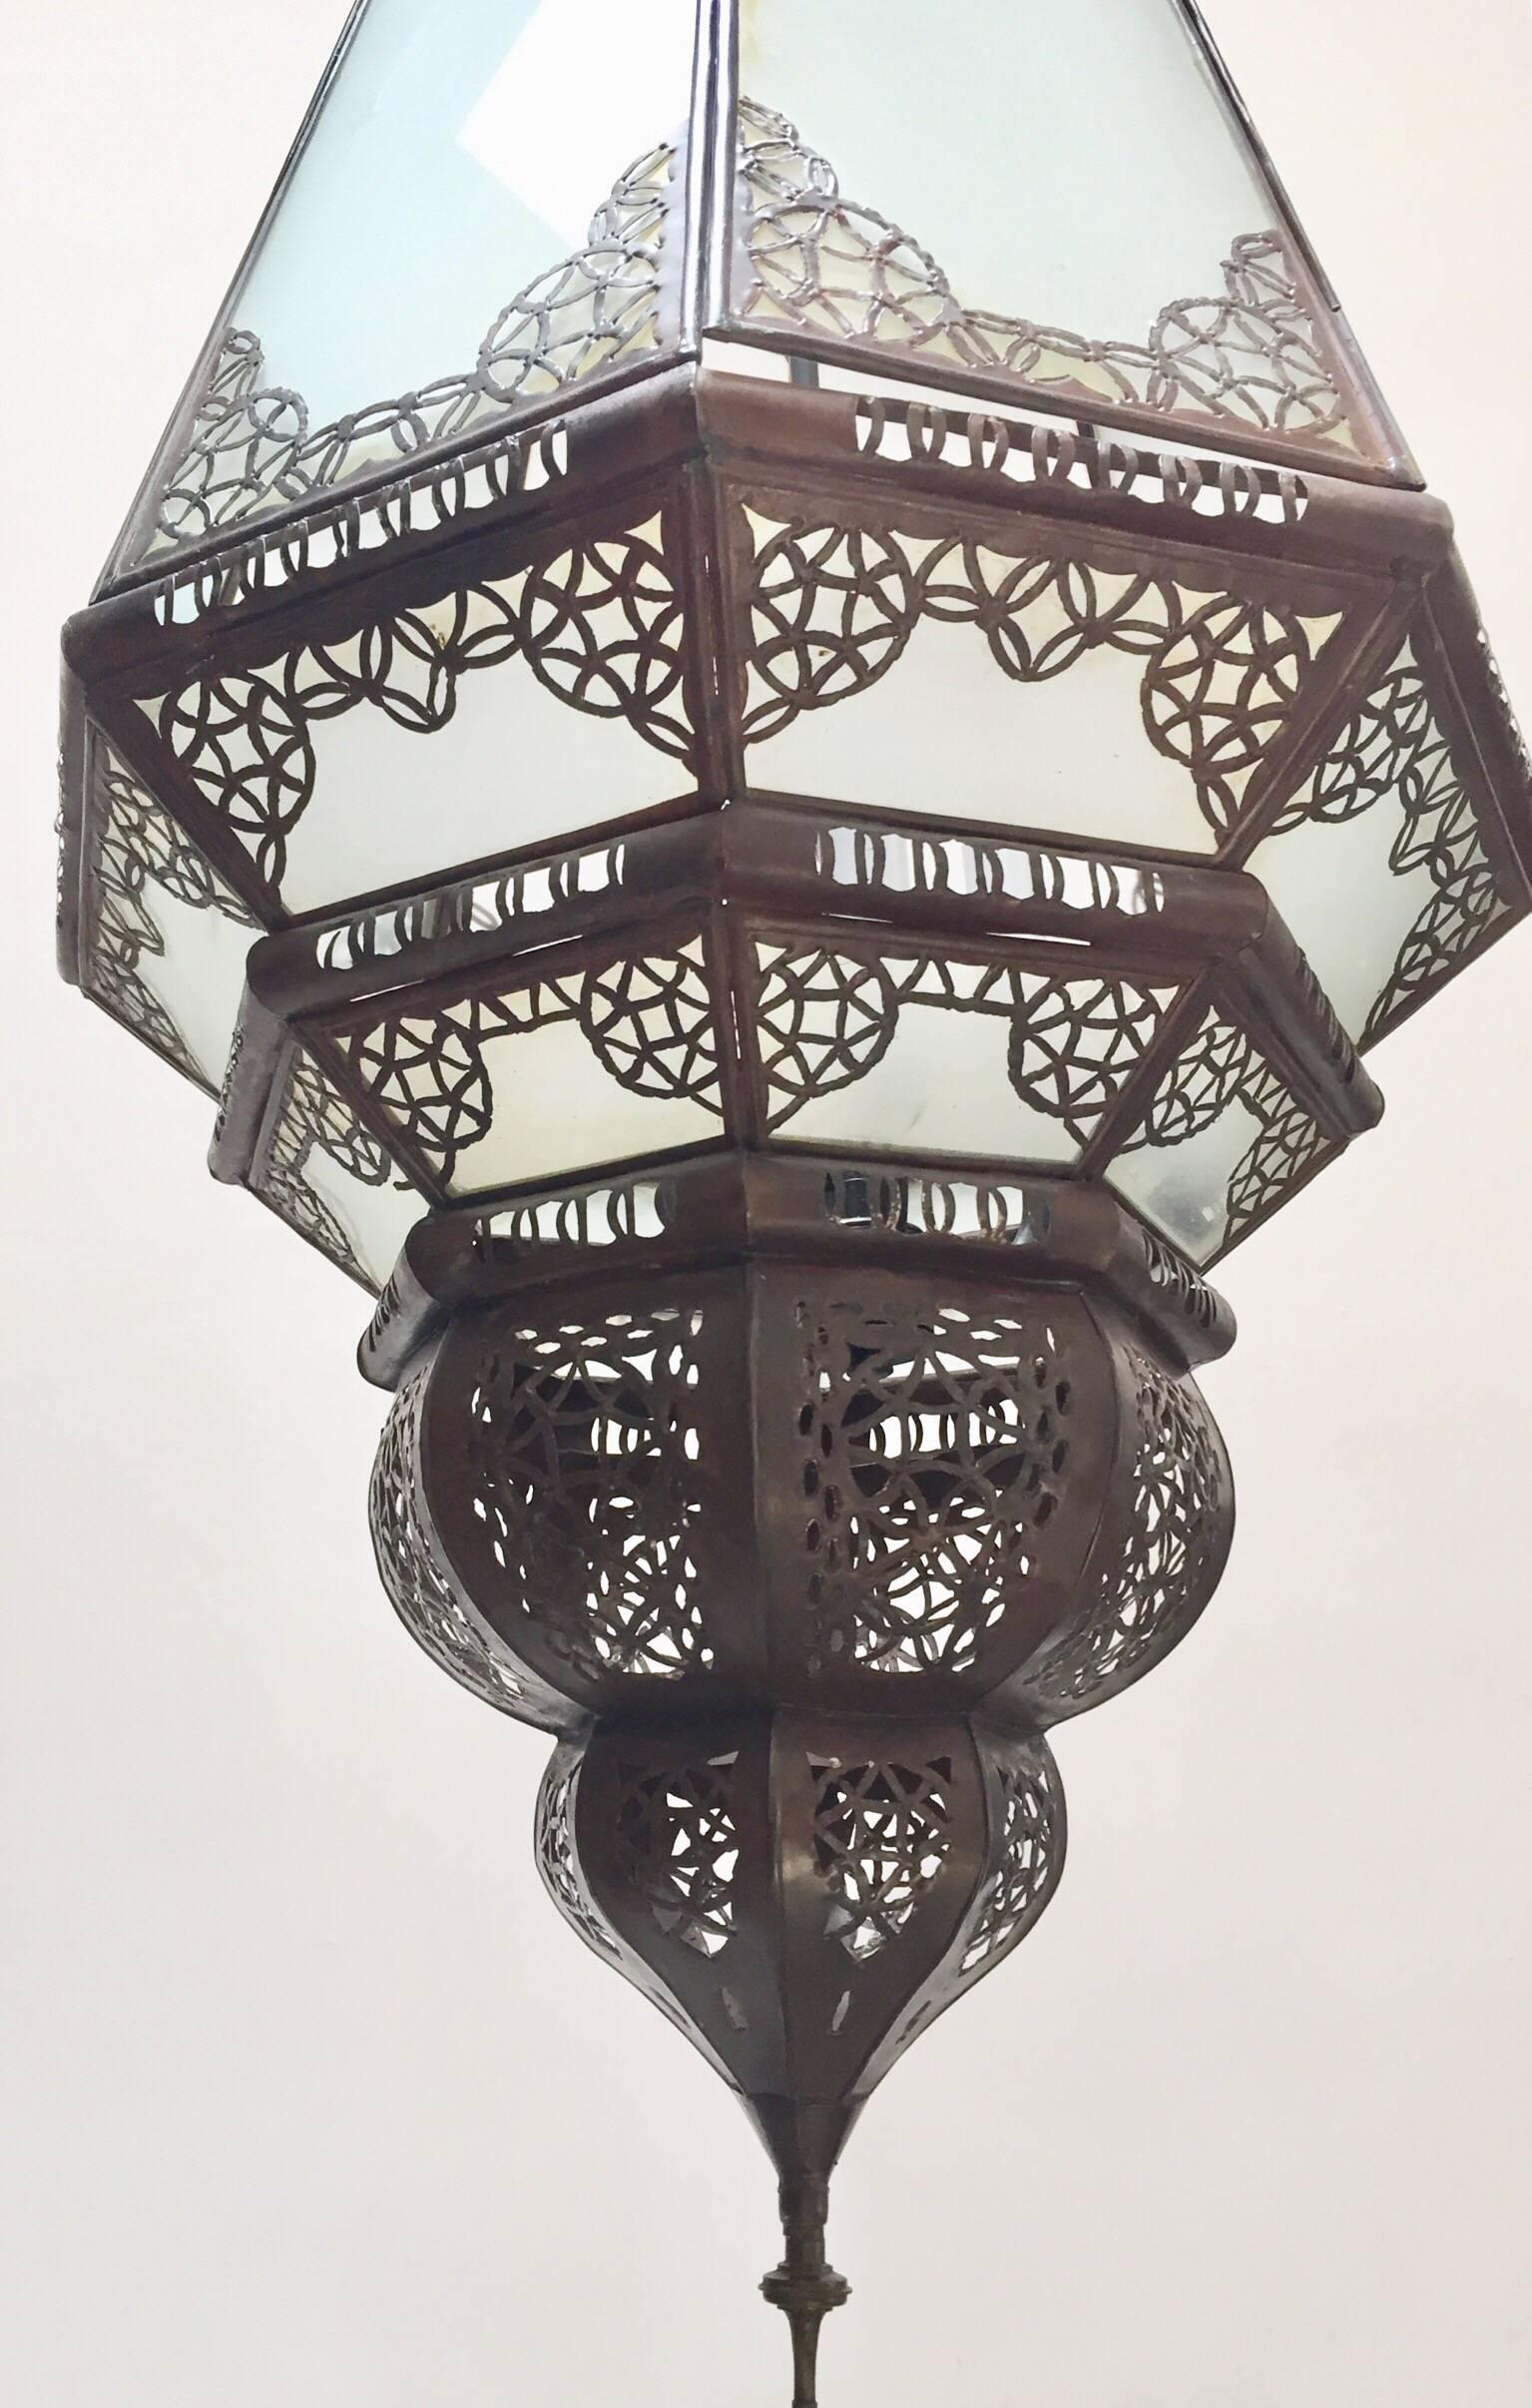 Great vintage Moroccan handcrafted frosted glass lantern.
The top and bottom metal hand-crafted in openwork Moorish design.
Rewired with a cluster of four lights.
Comes with 3 feet chains and canopy, chains could be adjusted to your